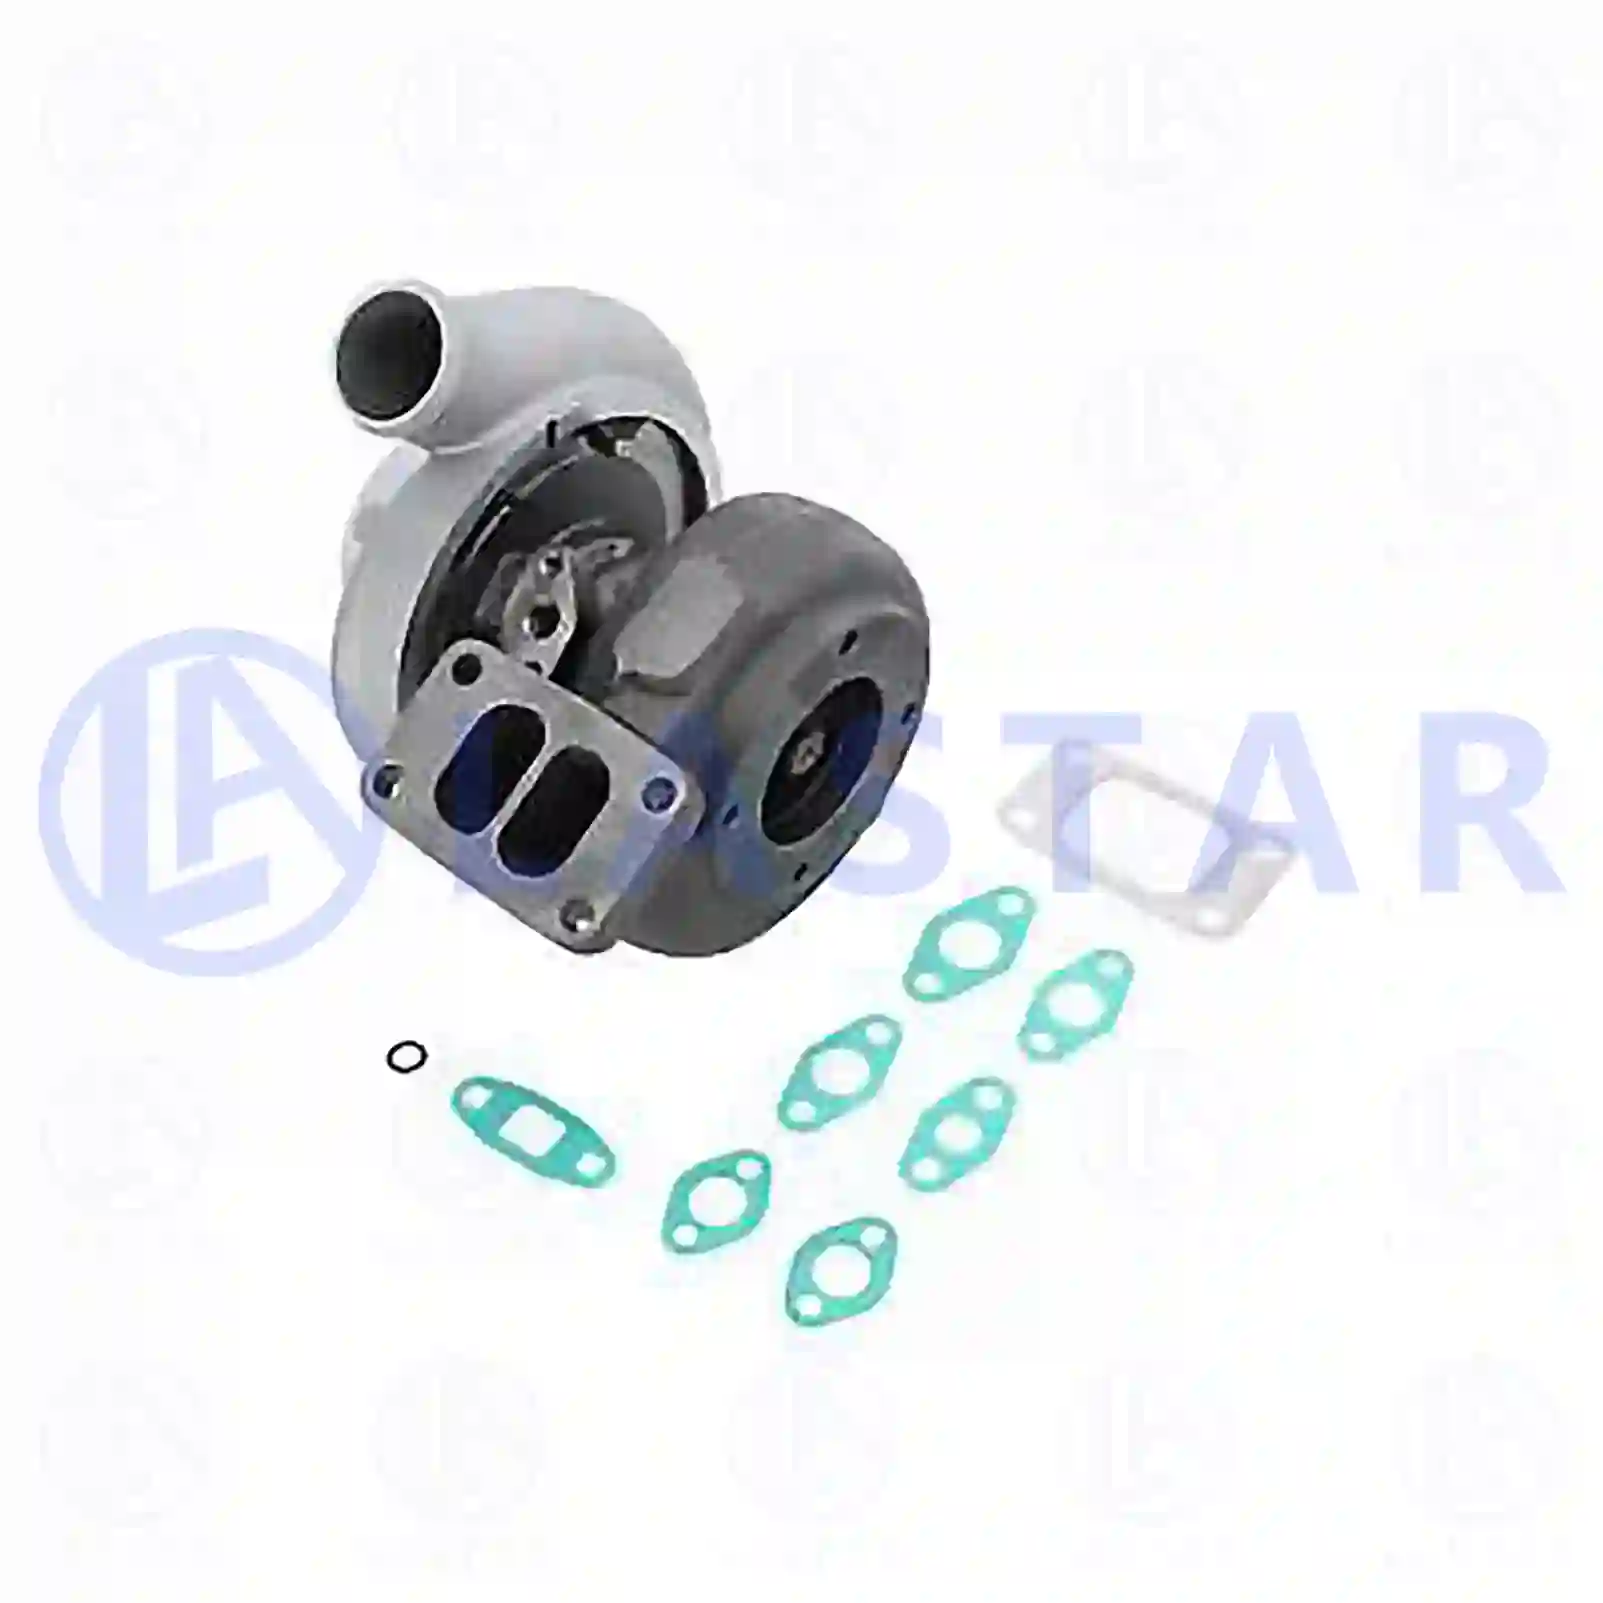 Turbocharger, with gasket kit, 77700772, 51091007531, 51091007585, 51091007616, 51091007622, 51091009531, 51091009585, 51091009616 ||  77700772 Lastar Spare Part | Truck Spare Parts, Auotomotive Spare Parts Turbocharger, with gasket kit, 77700772, 51091007531, 51091007585, 51091007616, 51091007622, 51091009531, 51091009585, 51091009616 ||  77700772 Lastar Spare Part | Truck Spare Parts, Auotomotive Spare Parts